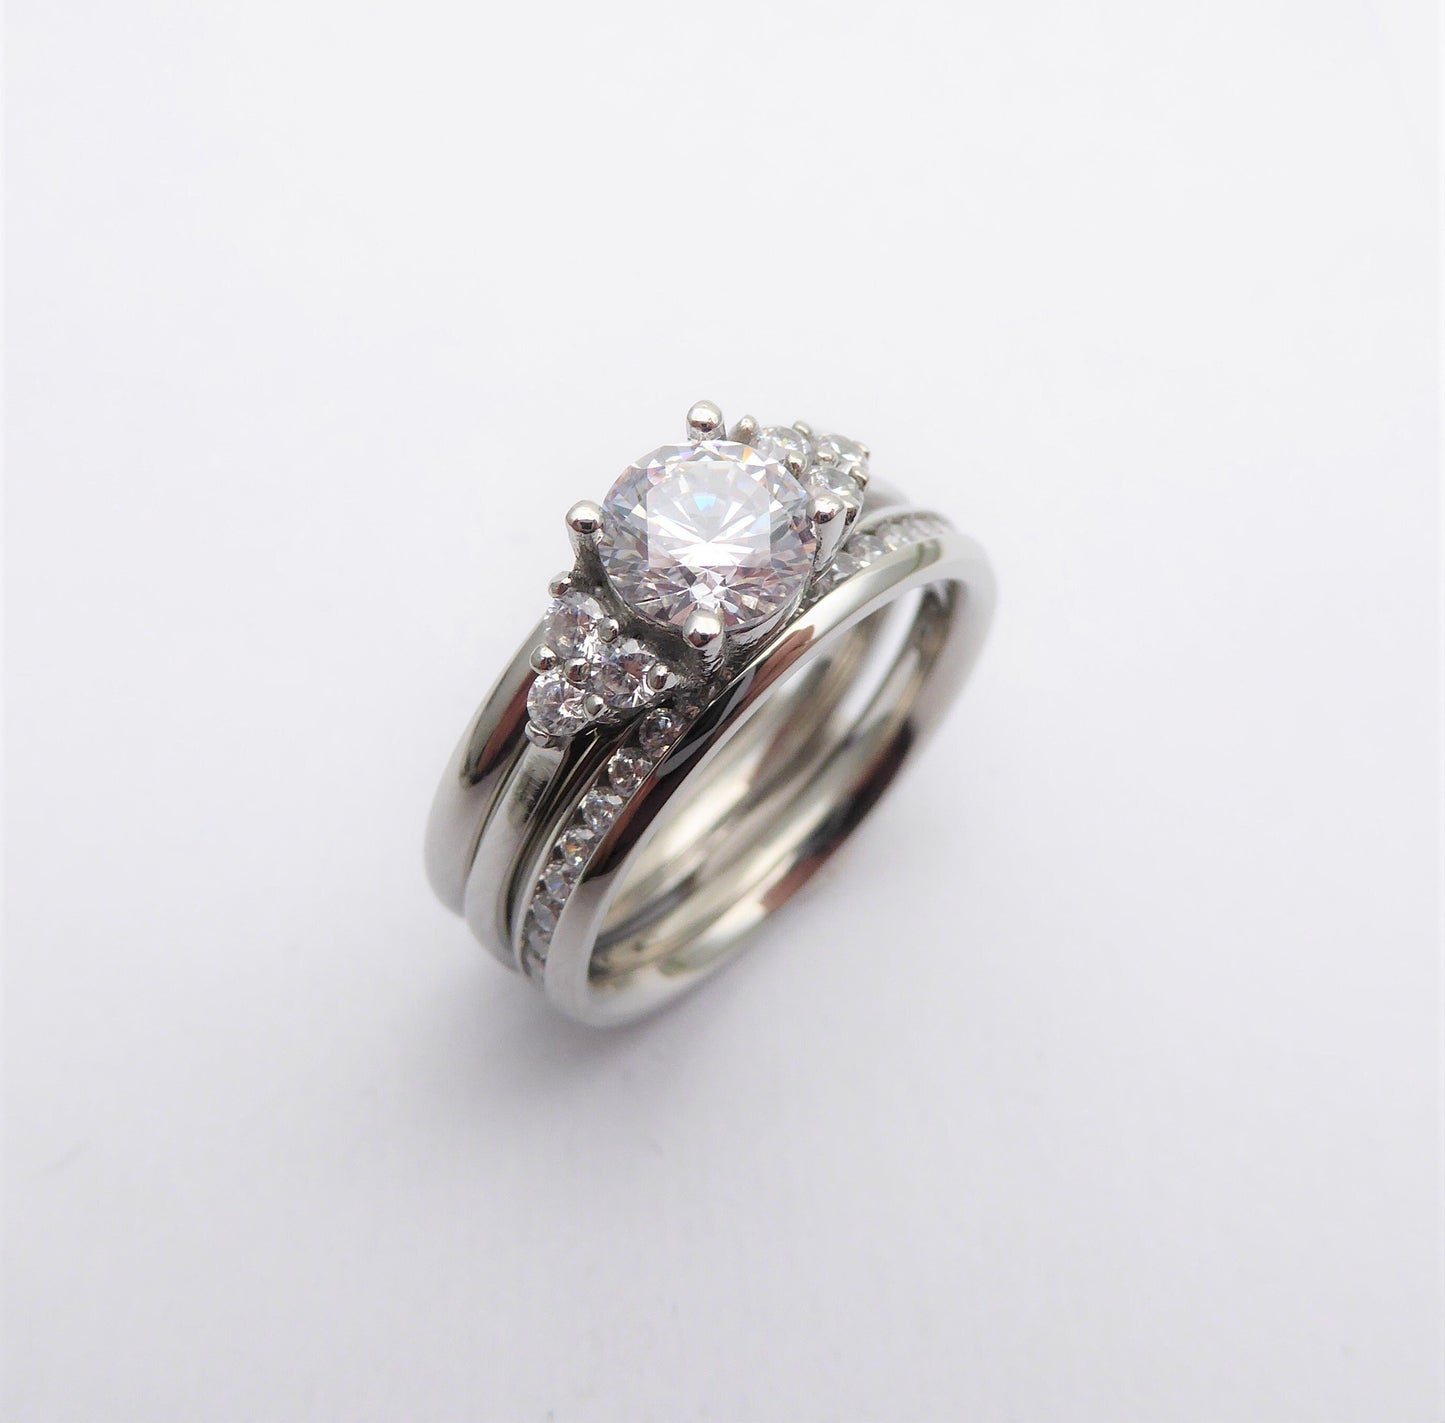 Wedding set! Man Made White Sapphire engagment ring and matching eternity & Wedding ring in Titanium or White Gold